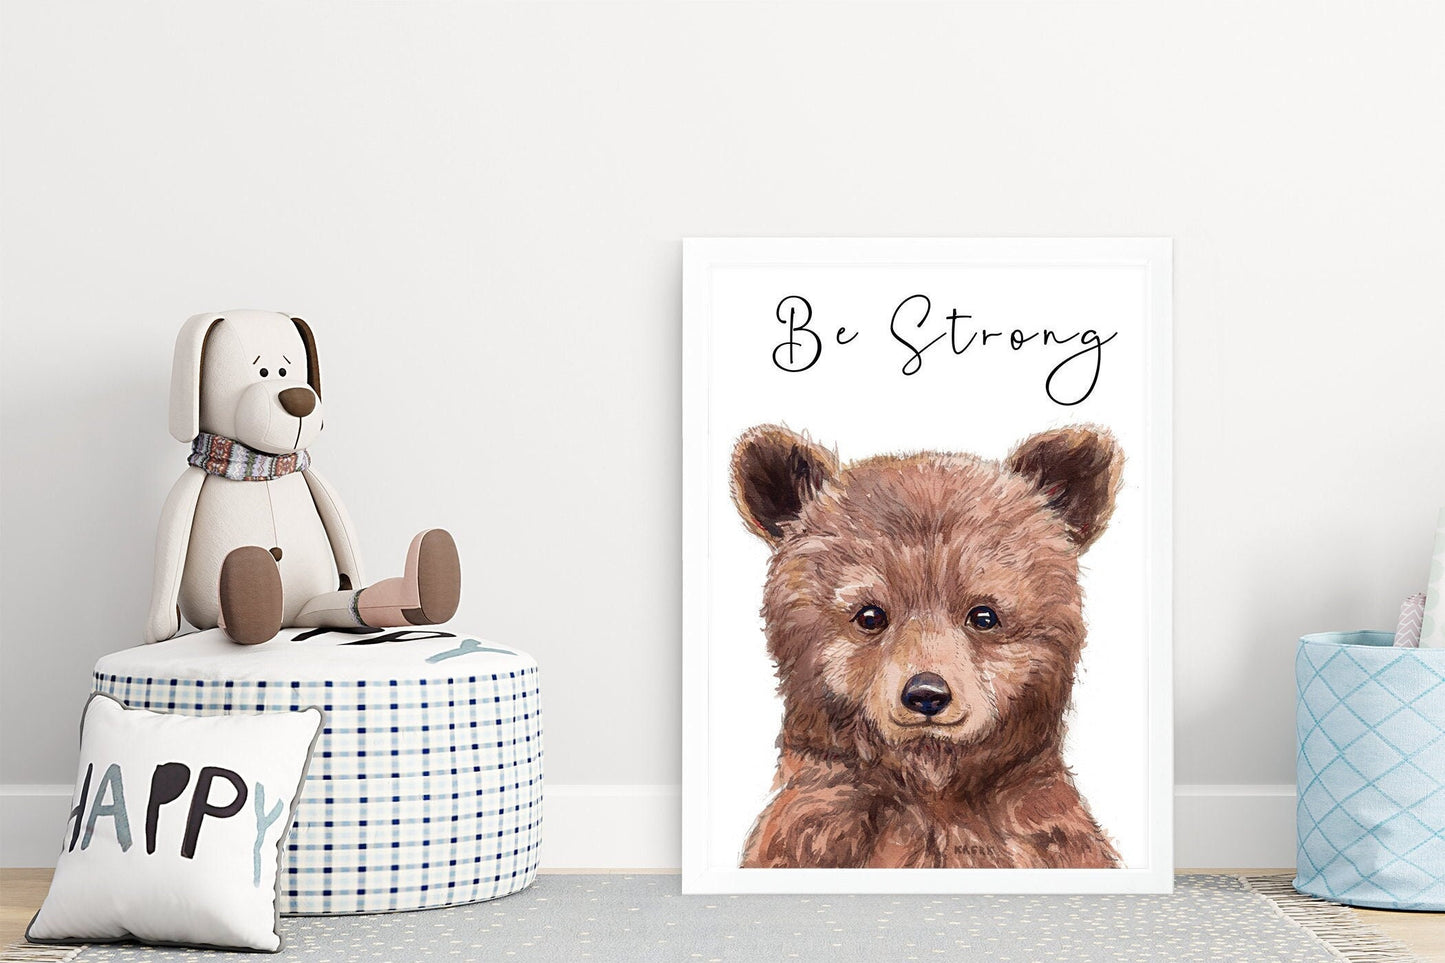 Children's be kind prints | Set of 3 | baby animal portraits | Choose your own safari pictures | A3 | Square | A4 | A5